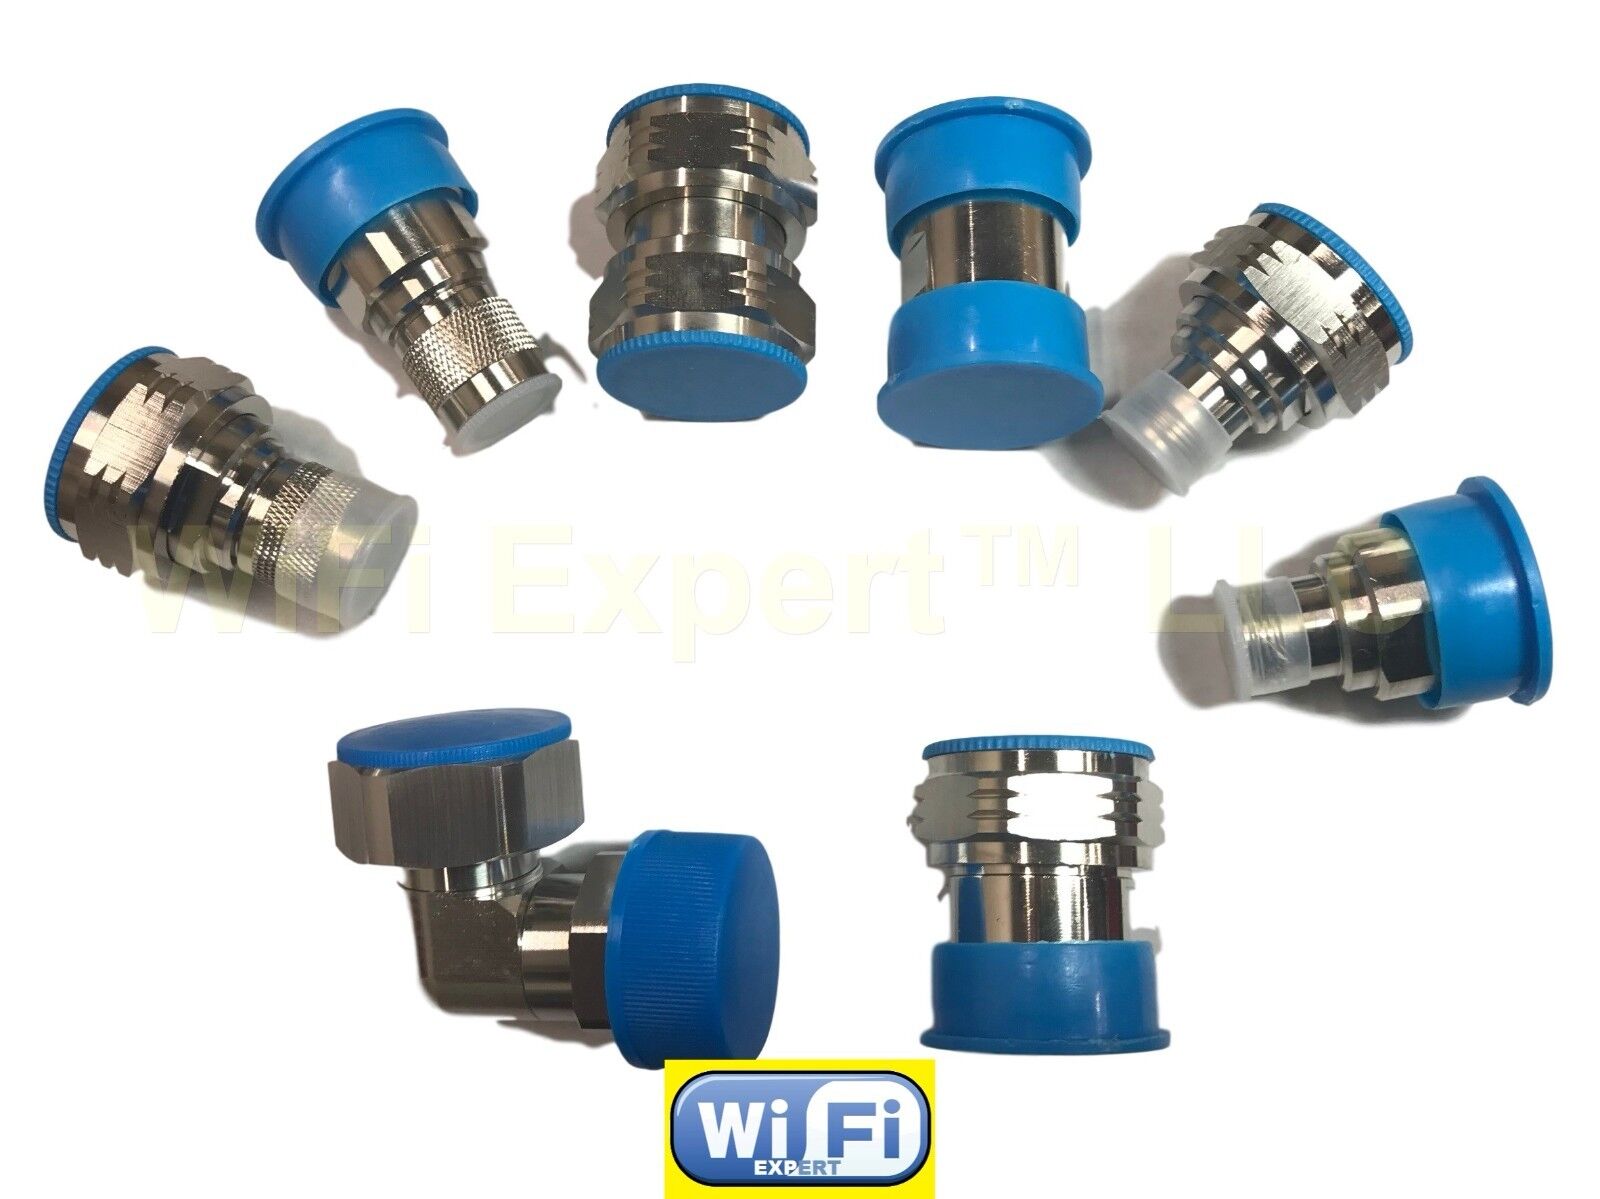 7/16 DIN male/female to Type N male/female 7/16 to 7/16 M/F adapter kit 8pc/set